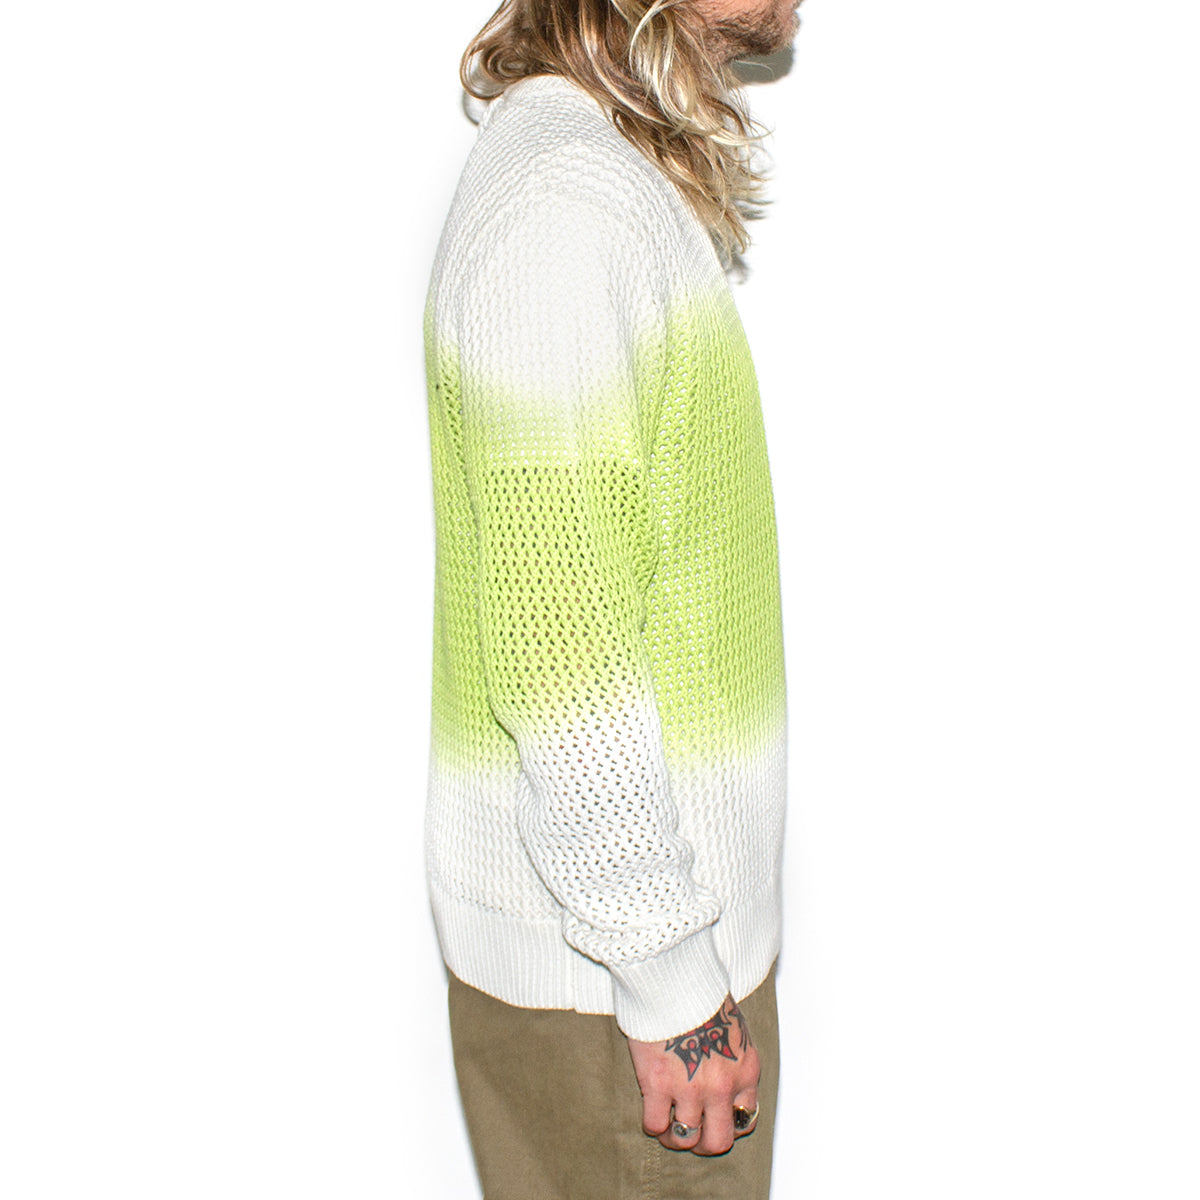 Stussy | Pigment Dyed Loose Gauge Sweater Style # 117105 Color : Bright Green